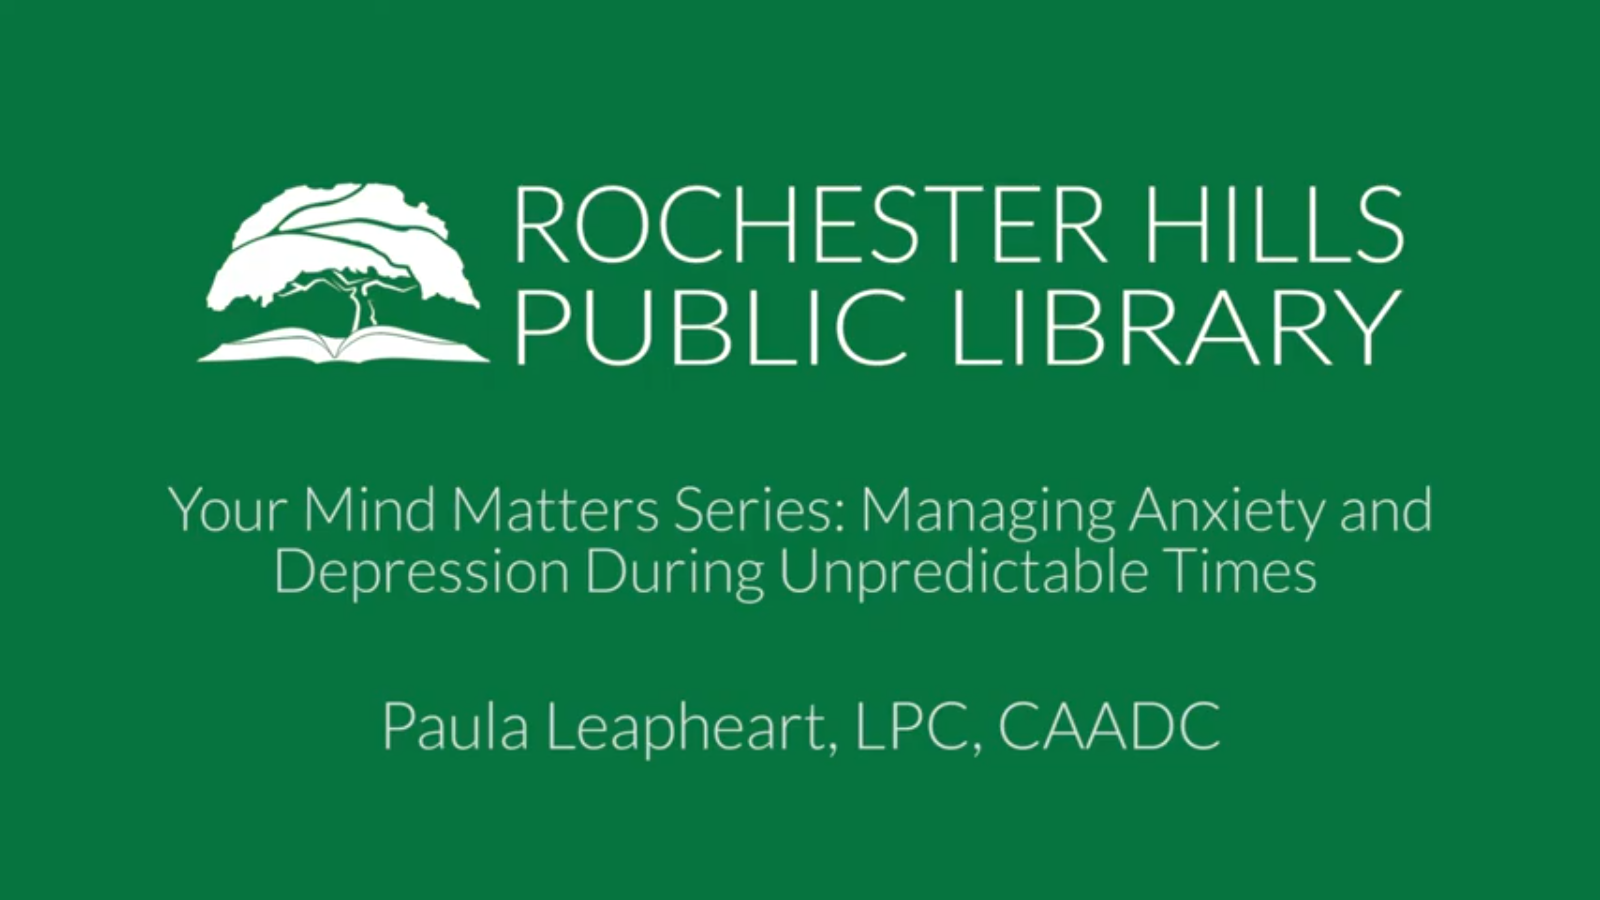 Your Mind Matters Series: Managing Anxiety and Depression During Unpredictable Times